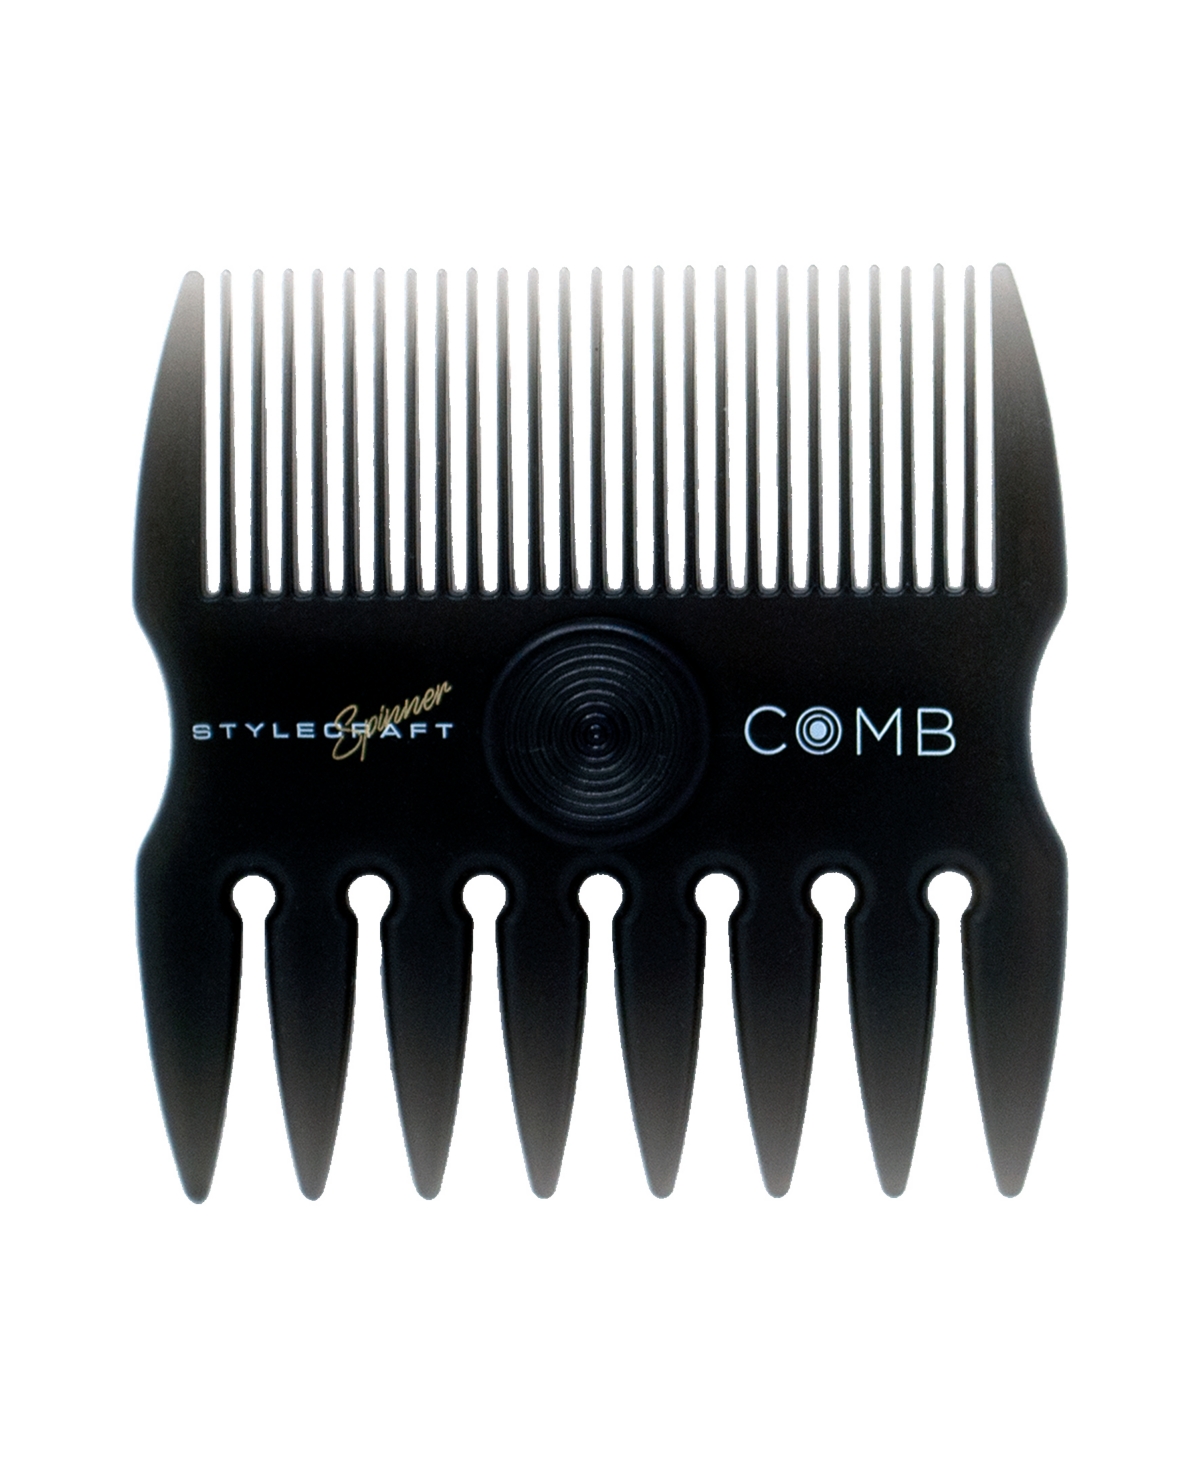 2 in 1 Spinner Fine/Coarse Tooth Texturizing and Grooming Hair Comb - Gray